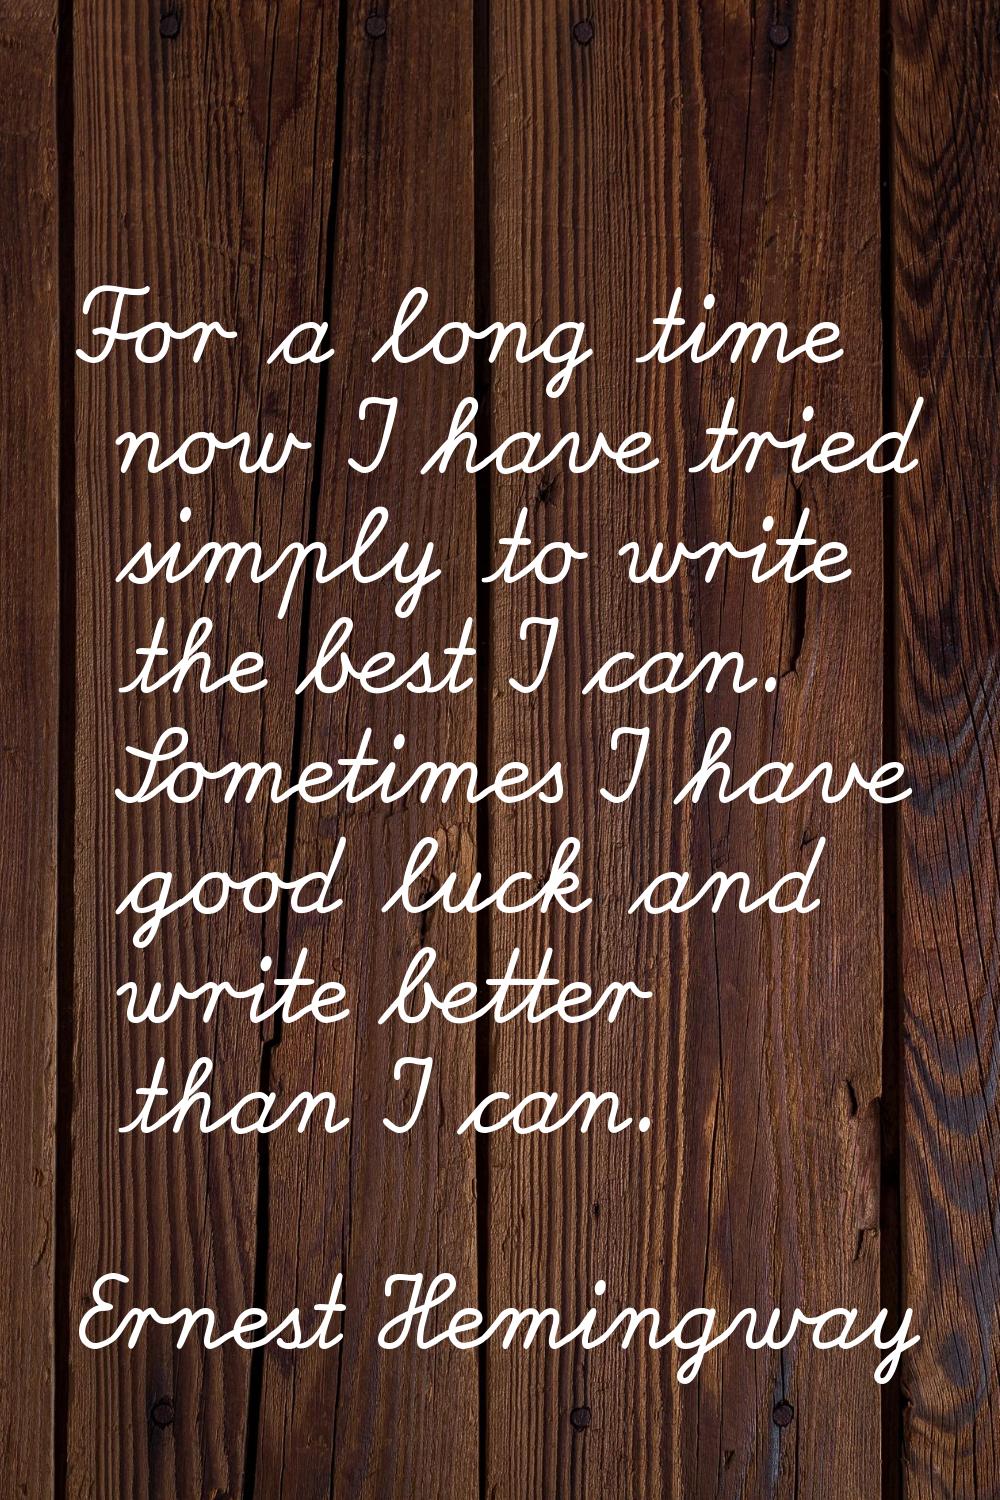 For a long time now I have tried simply to write the best I can. Sometimes I have good luck and wri